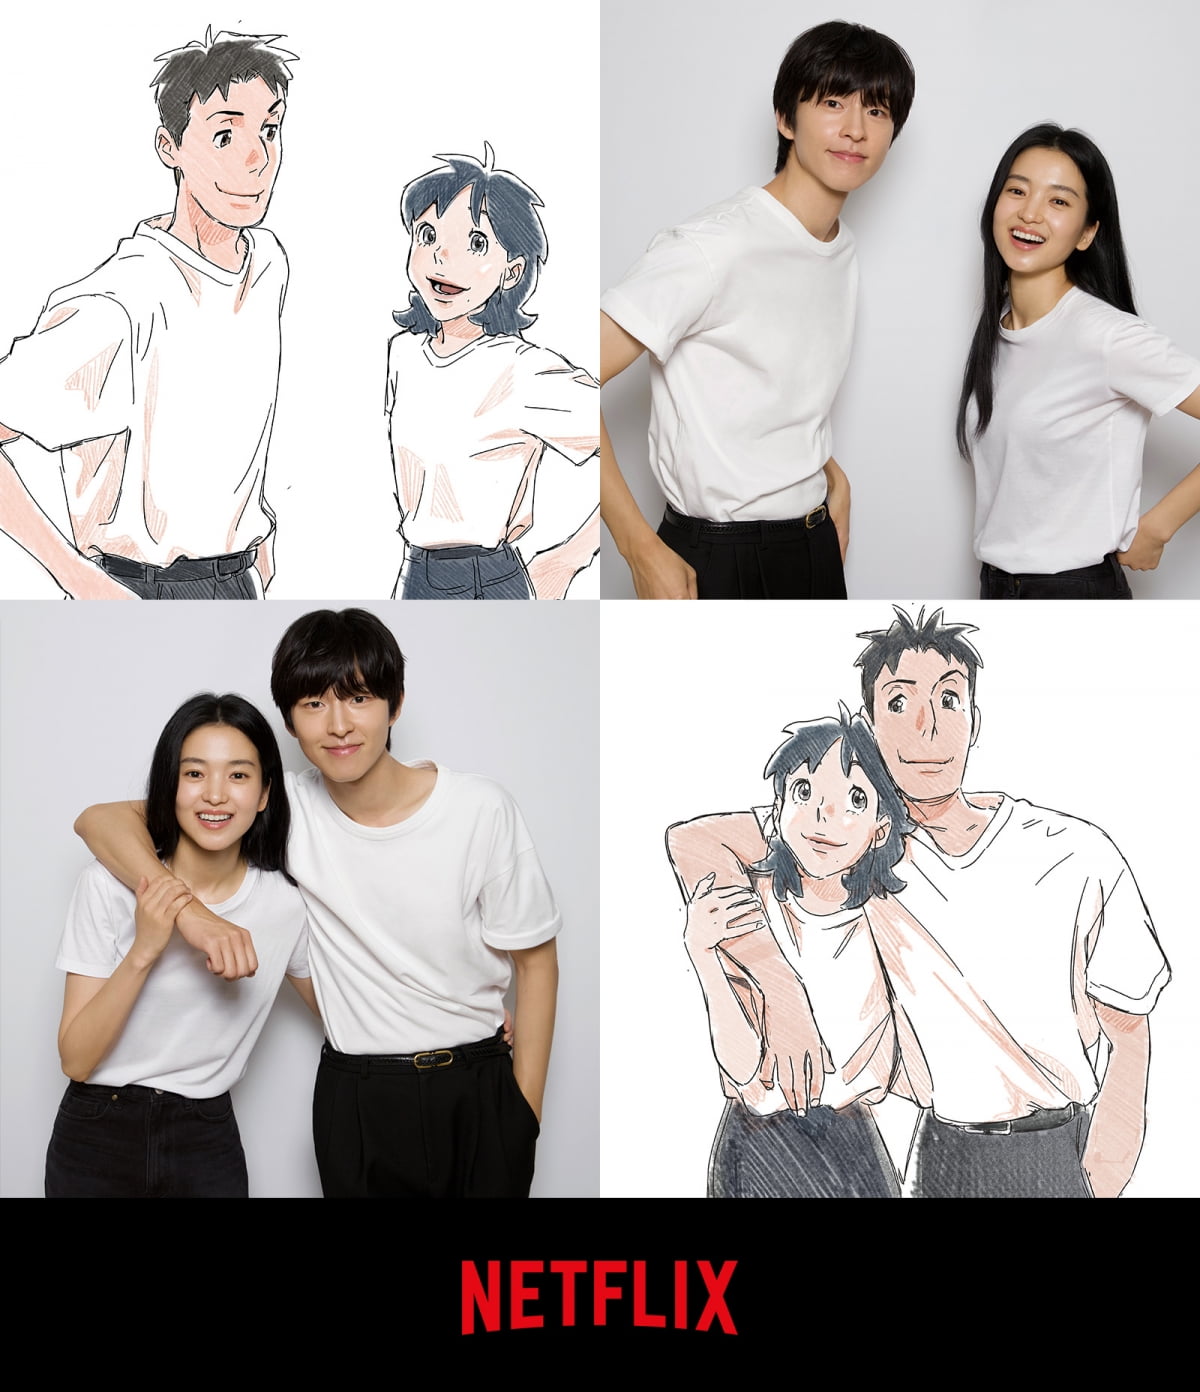 Kim Tae-ri and Hong-kyung cast their voices in the Netflix animated film 'Necessary for This Star'